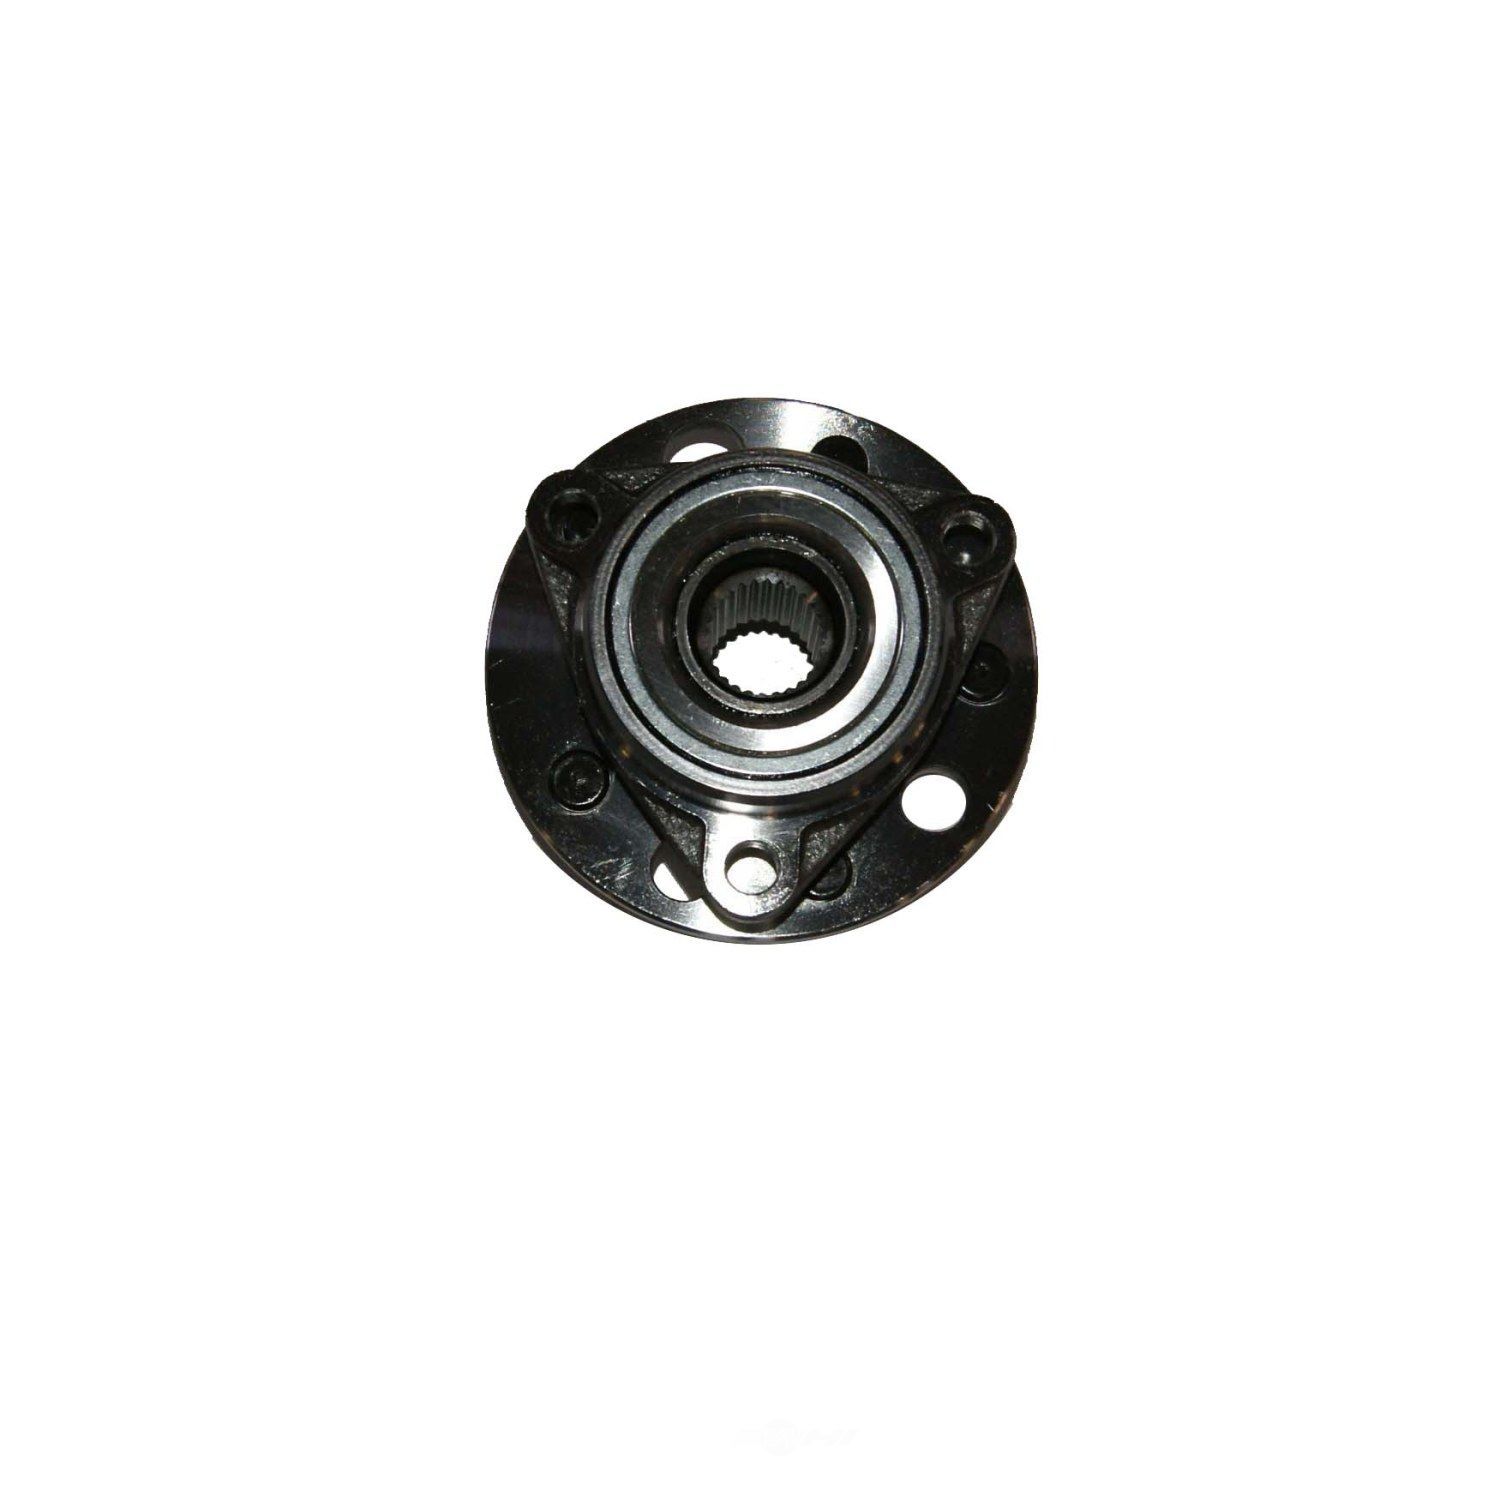 GMB 730-0178 Wheel Bearing and Hub Assembly for 1988 Buick Reatta 3.8L V6  Gas OHV